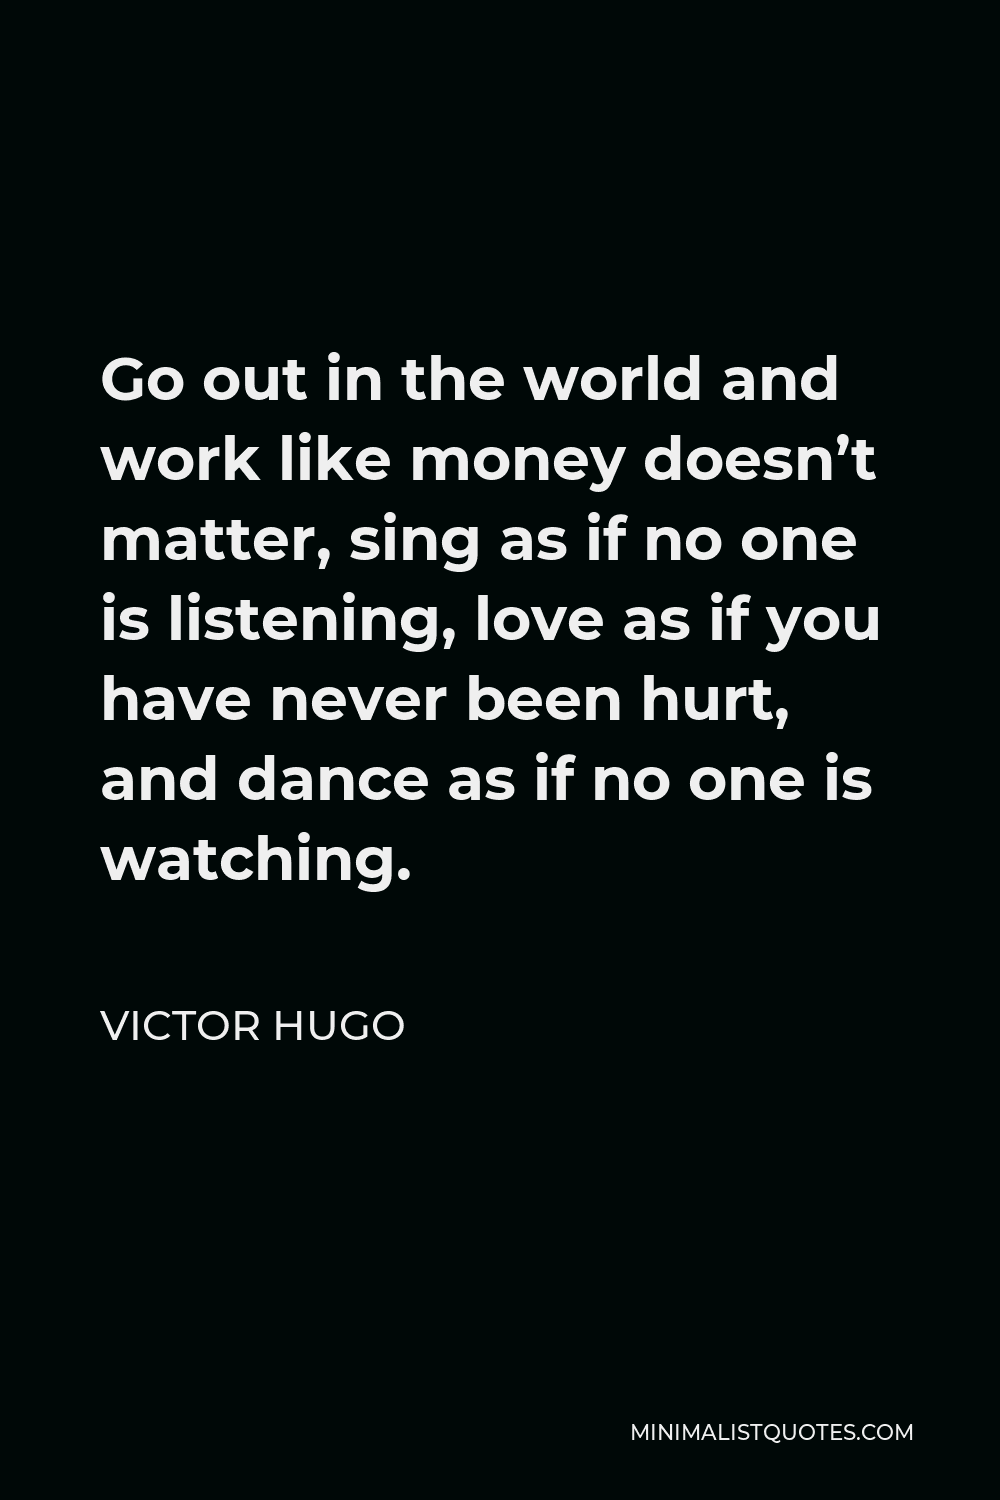 Victor Hugo Quote - Go out in the world and work like money doesn’t matter, sing as if no one is listening, love as if you have never been hurt, and dance as if no one is watching.